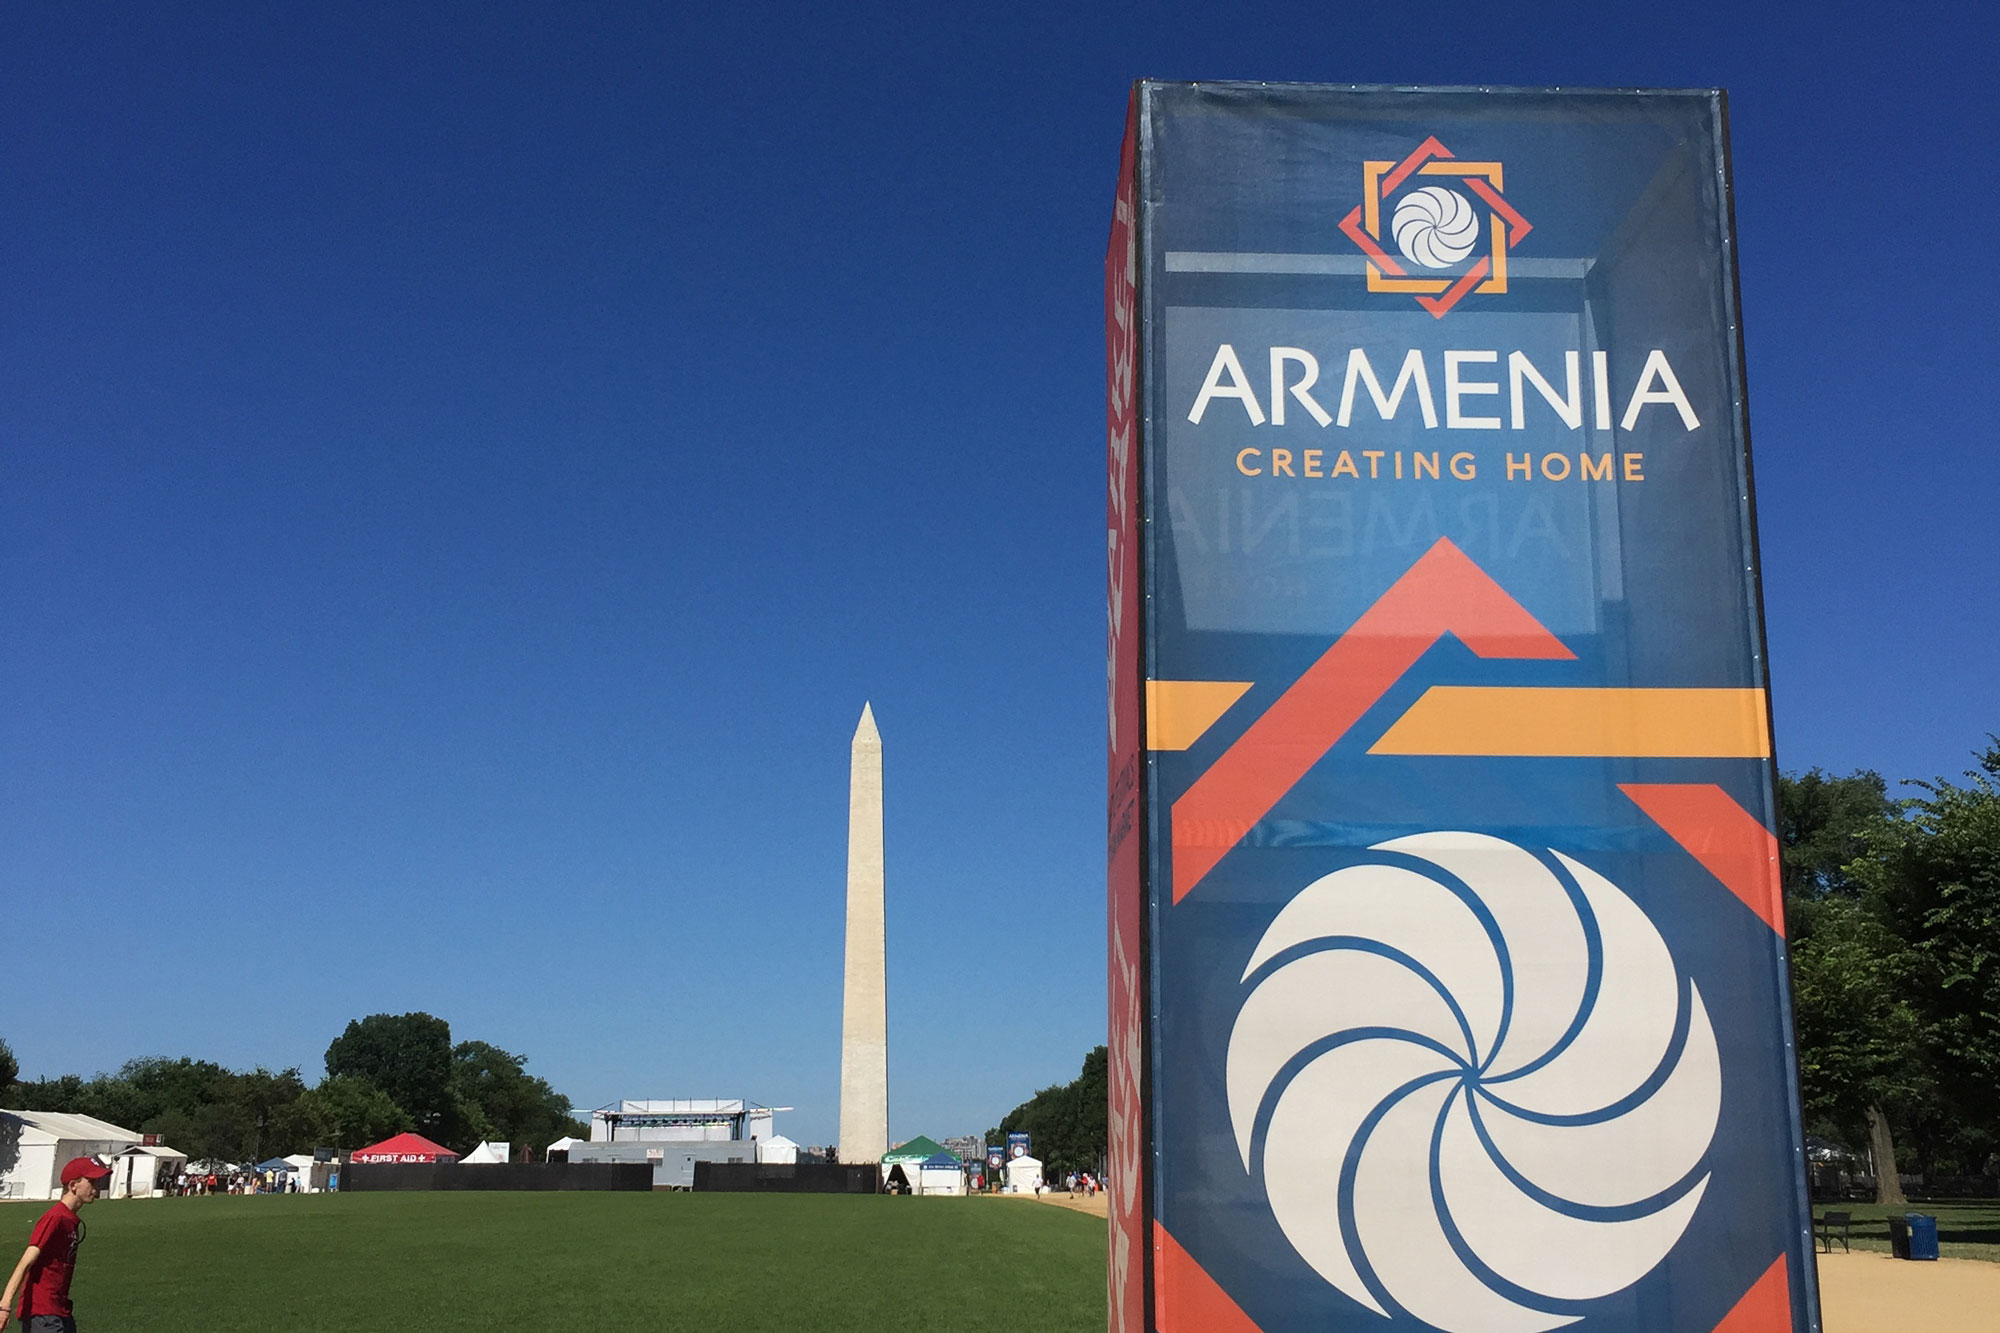 In the left foreground, a colorful sign with the words “Armenia Creating Home” stands on a patch of grass next to a dirt path. A large, white obelisk points towards the blue sky in the background. Between the sign and the obelisk is a large green field, with some tents and a sound stage.